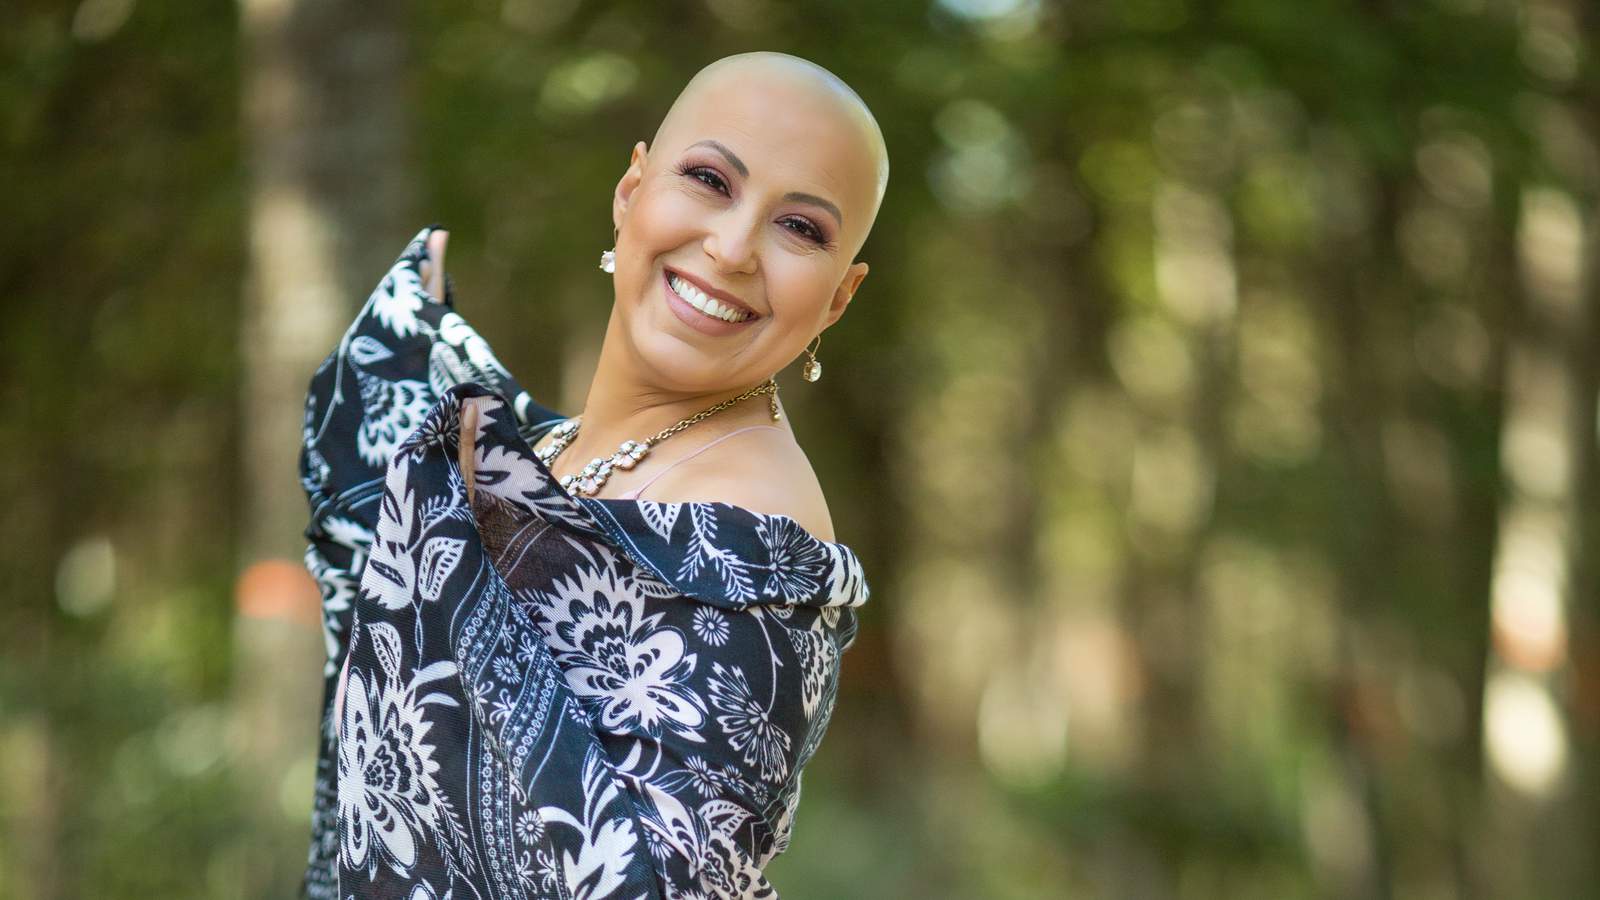 Voices of Houston: Meet Aurora Garcia, a breast cancer survivor helping spread awareness and advocacy to other patients